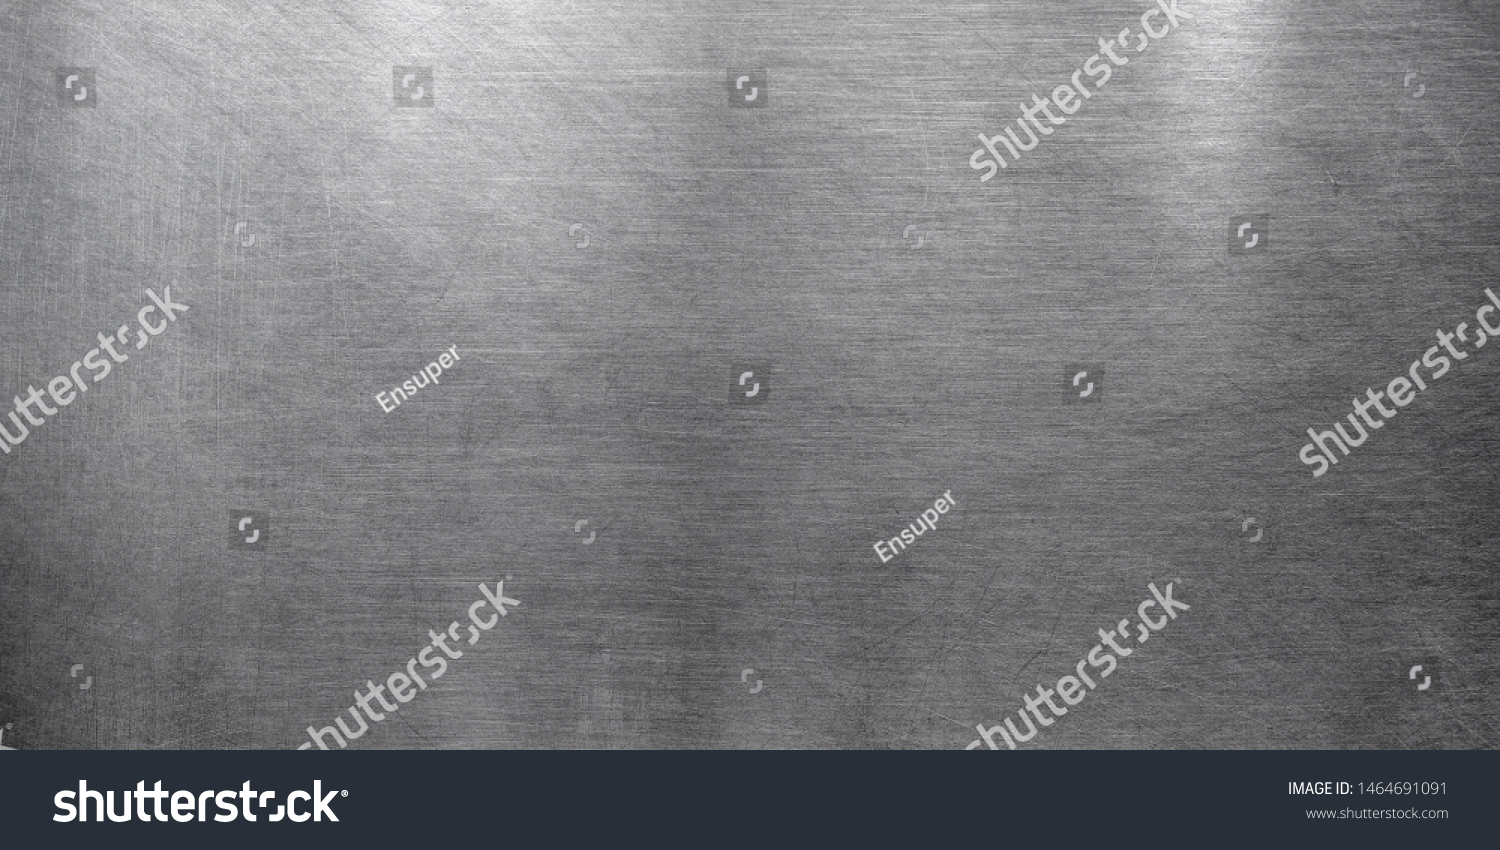 Polished metal texture, brushed stainless steel texture #1464691091